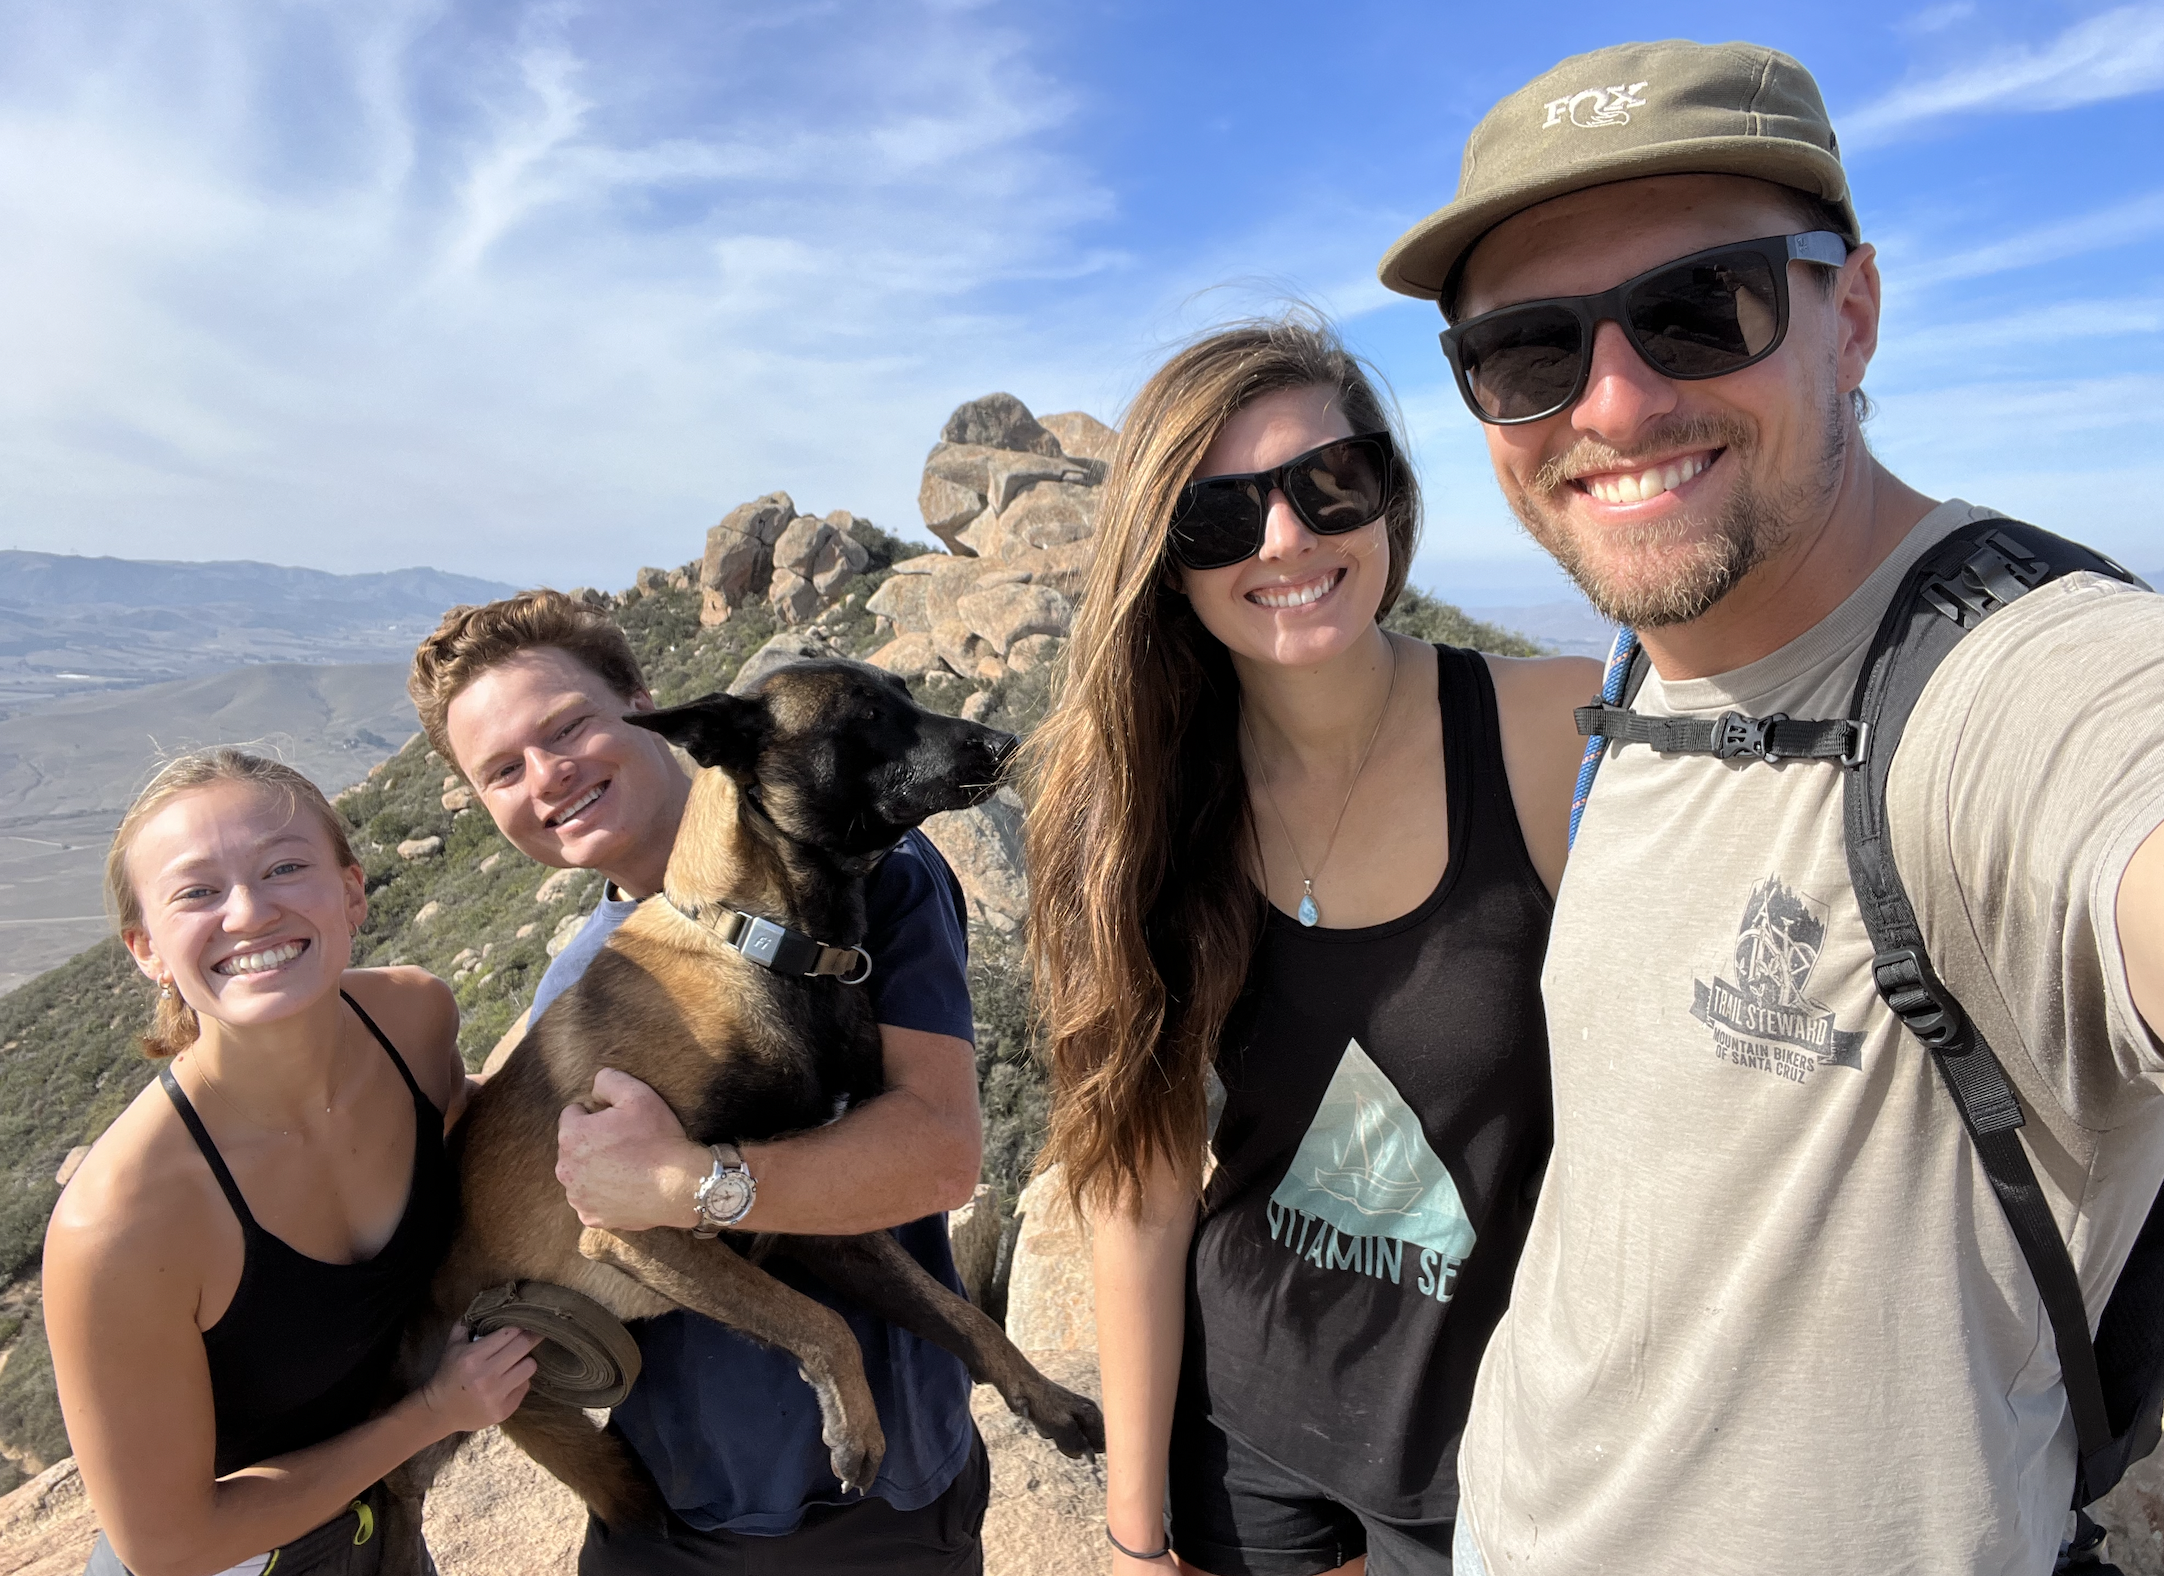 Olivia, Peter, Harlow and the Neely's at the top of Bishop Peak!